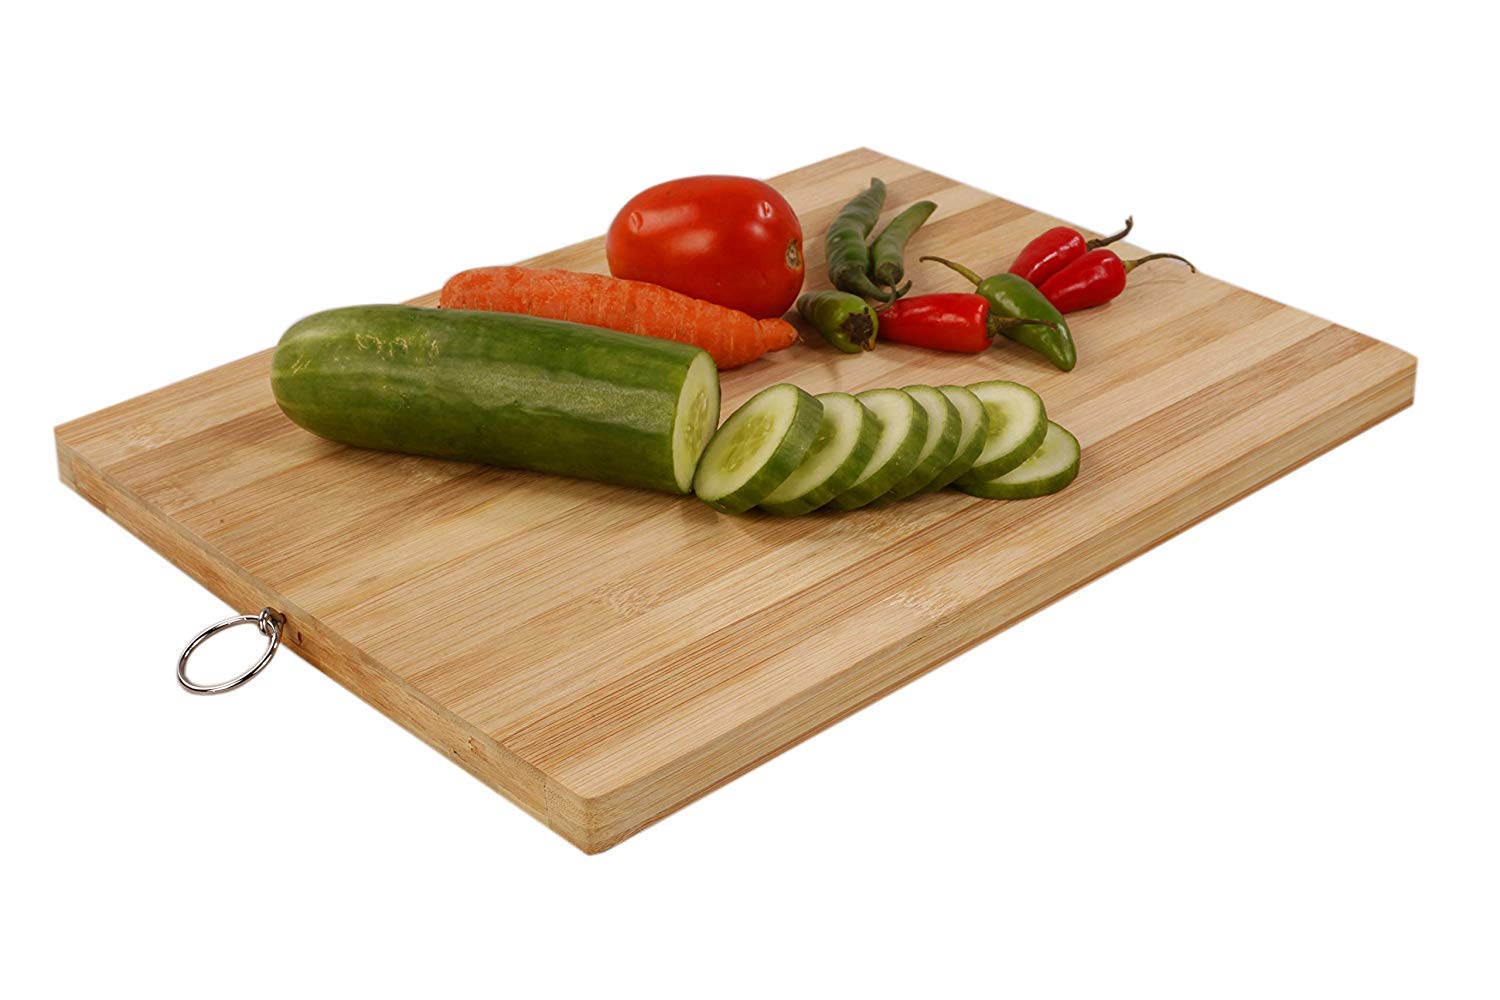 How to clean and sanitise wooden chopping boards